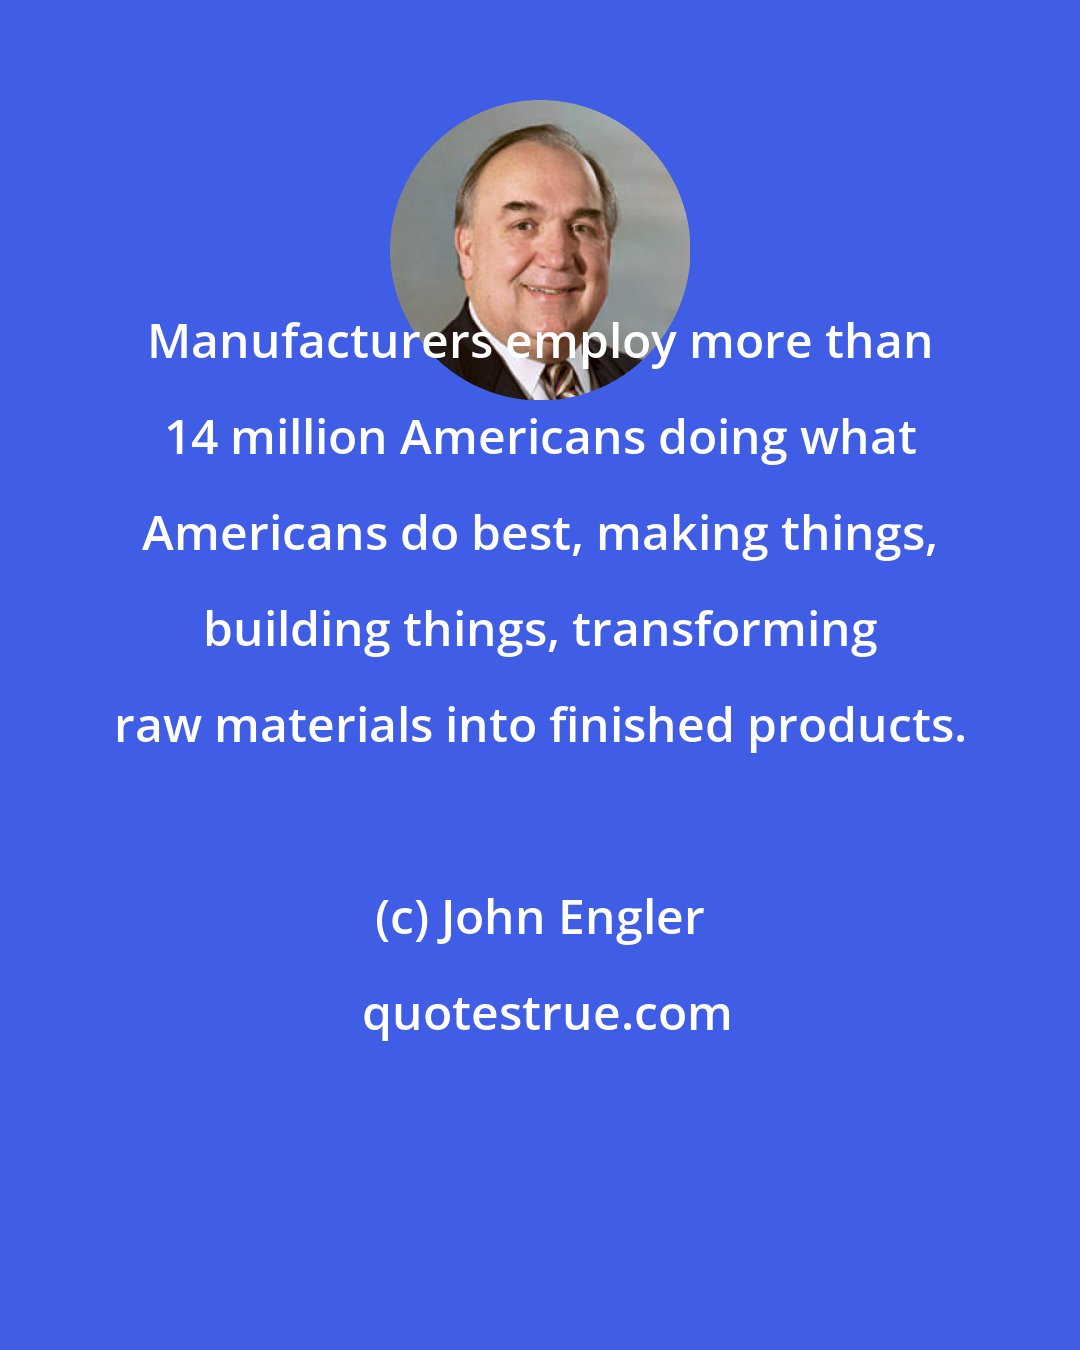 John Engler: Manufacturers employ more than 14 million Americans doing what Americans do best, making things, building things, transforming raw materials into finished products.